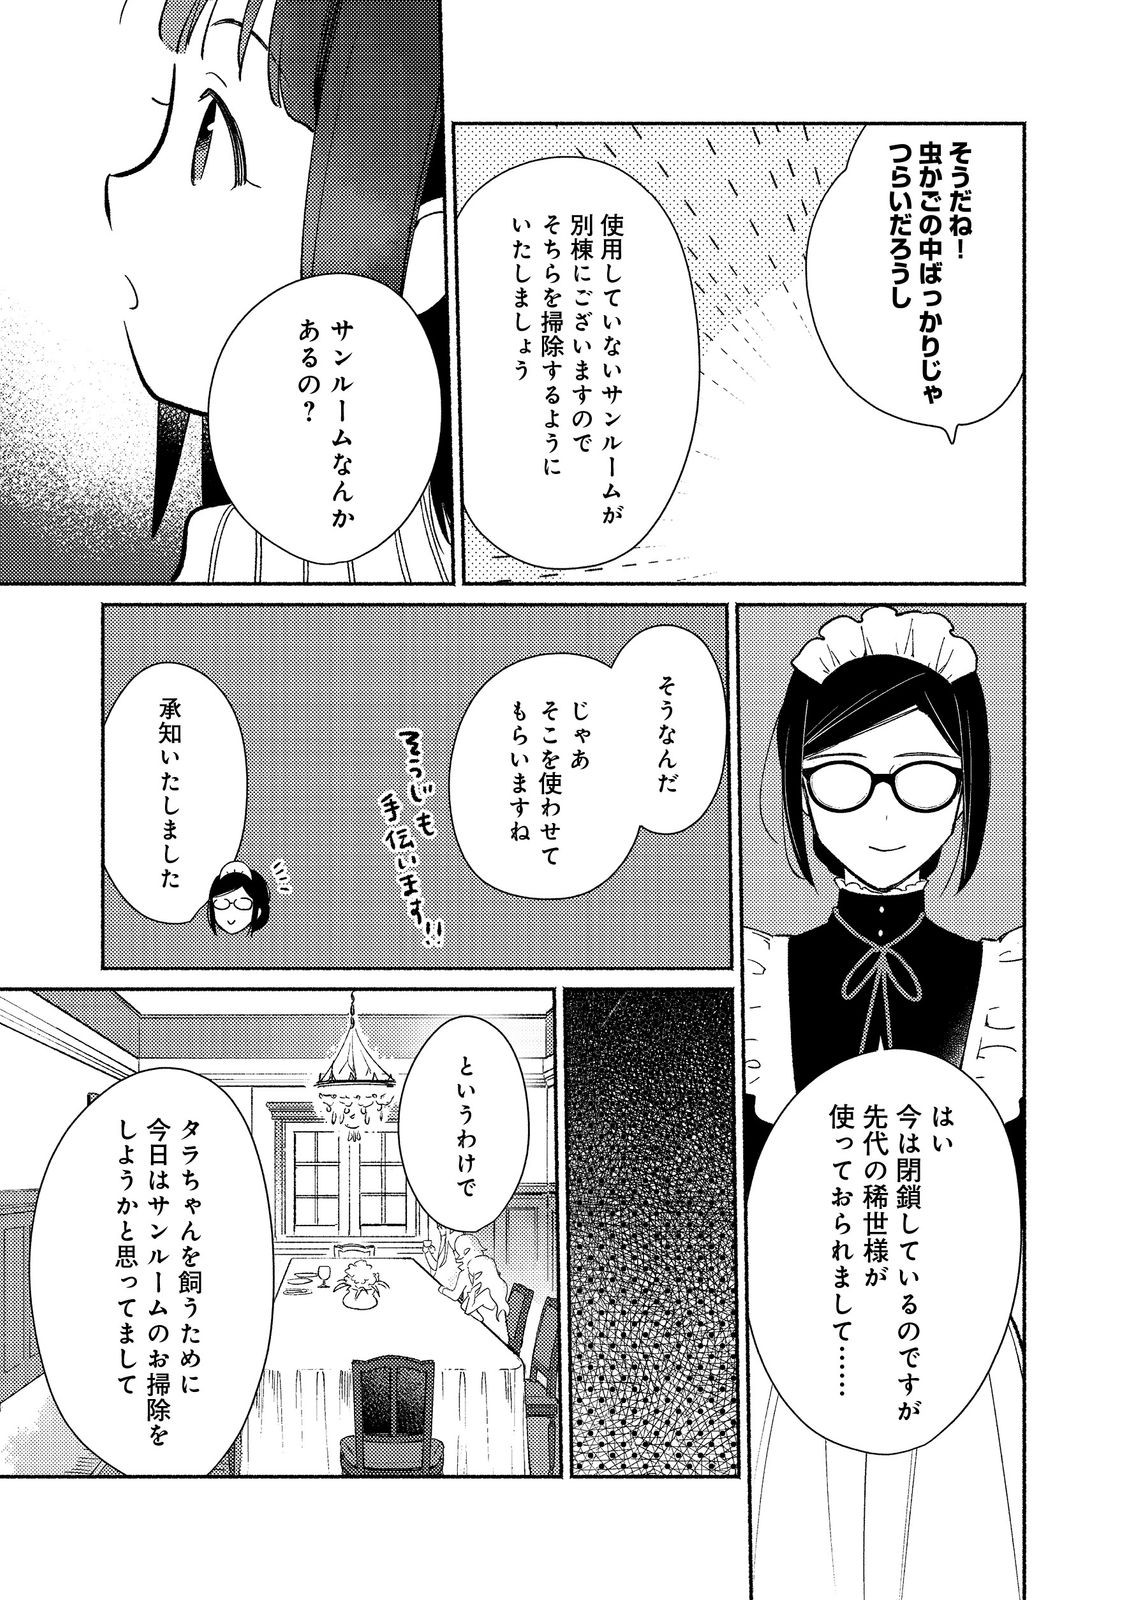 I’m the White Pig Nobleman 第27.1話 - Page 5